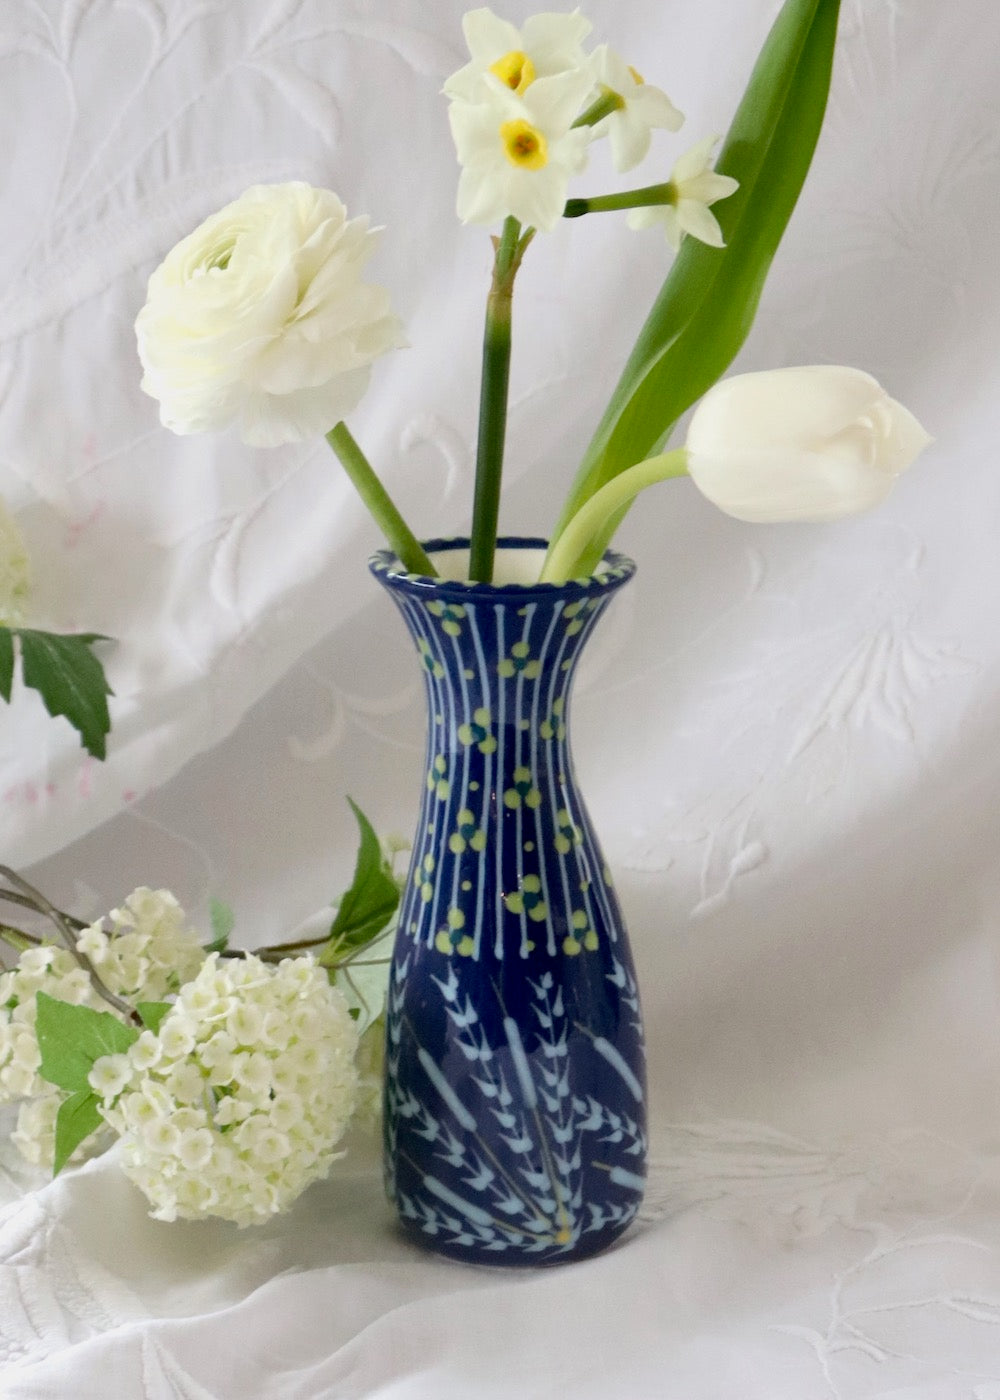 Bud Vase - Midnight Blue with Pale Blue fronds & Lime Dots